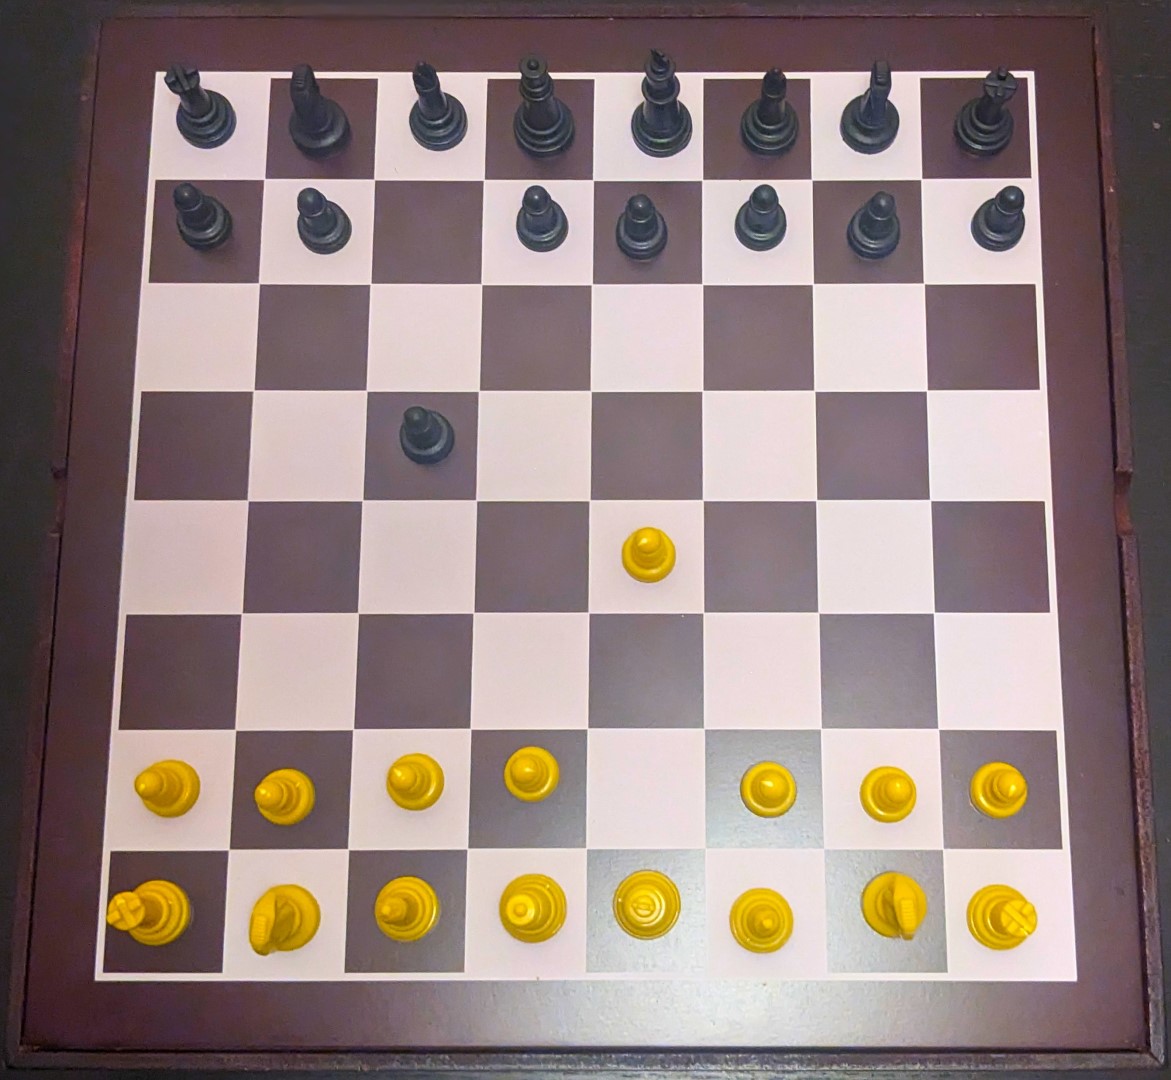 The Sicilian Defense, one of the best chess openings for beginners